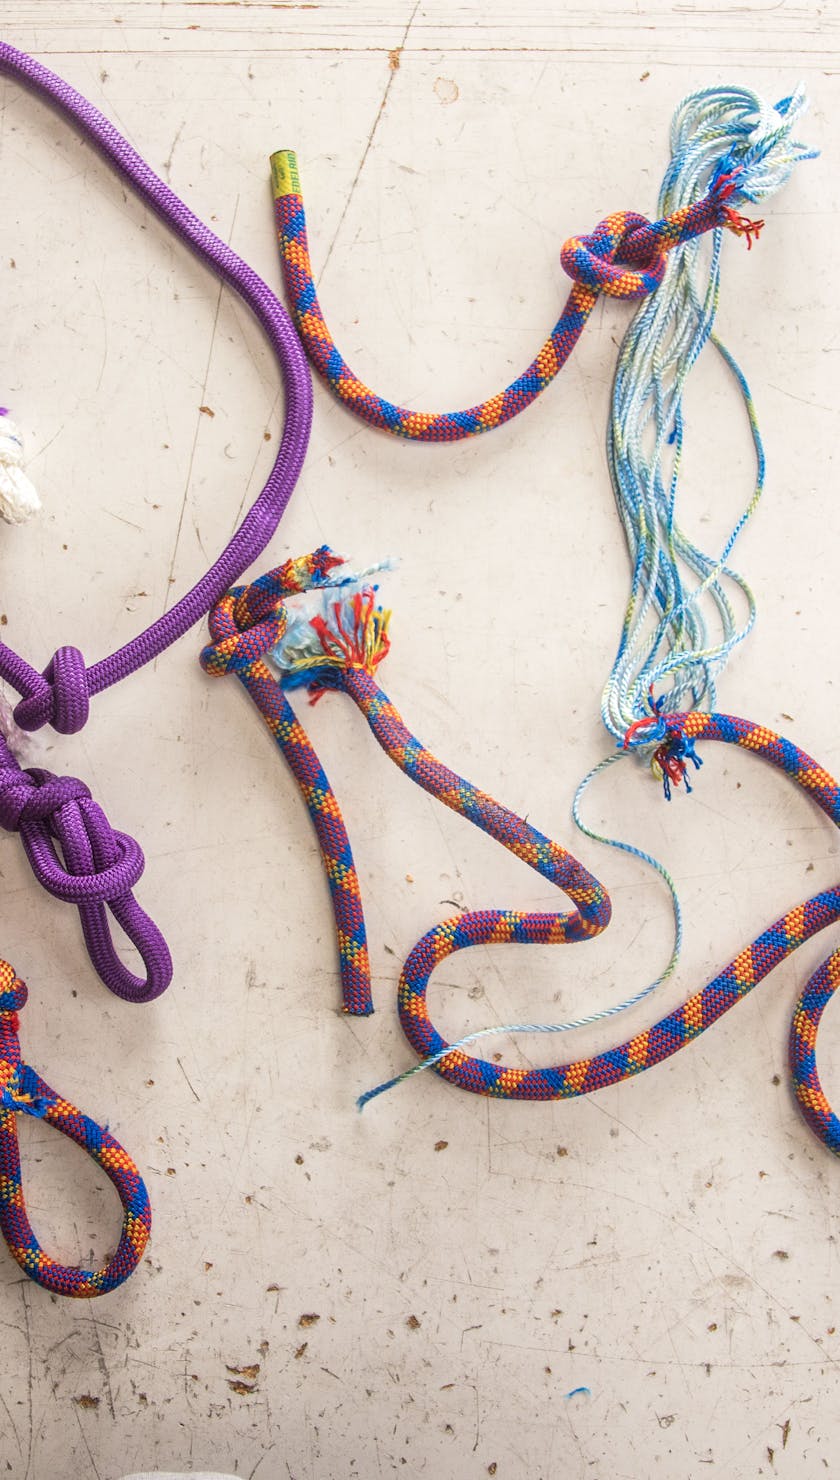 Old Climbing Ropes